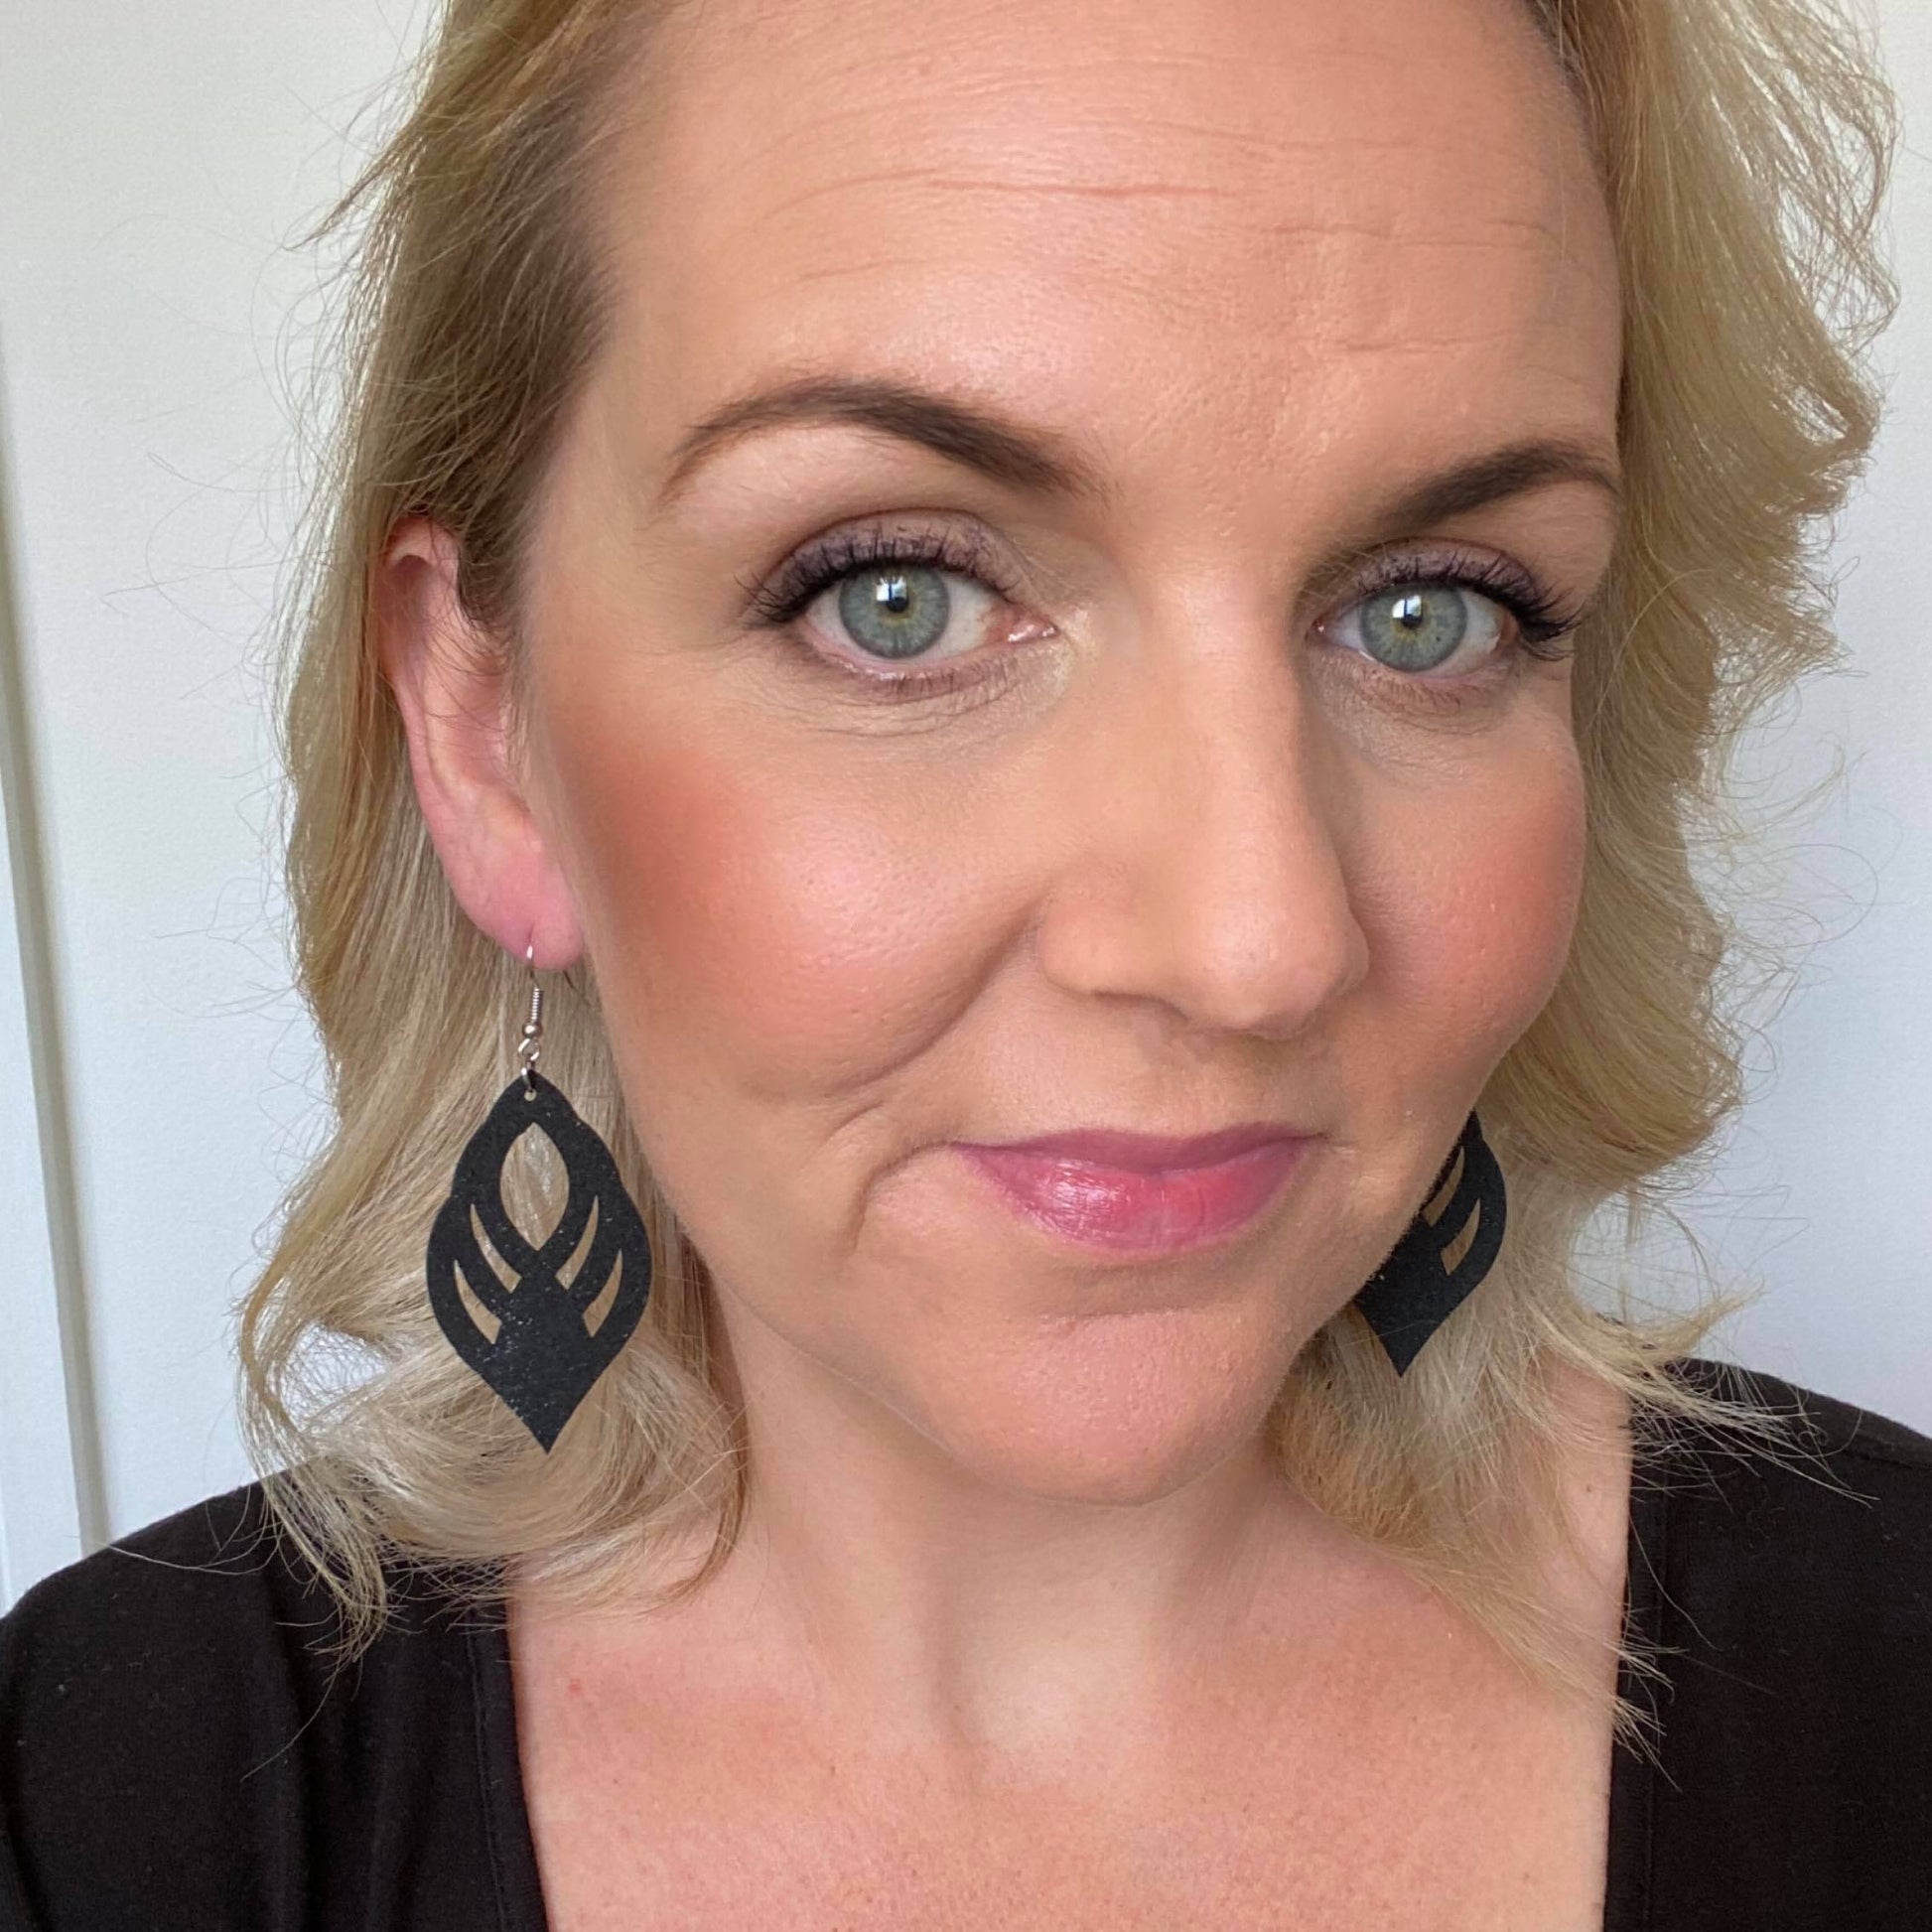 Black ornate cut out leather earrings with a silver coloured hook. selfie